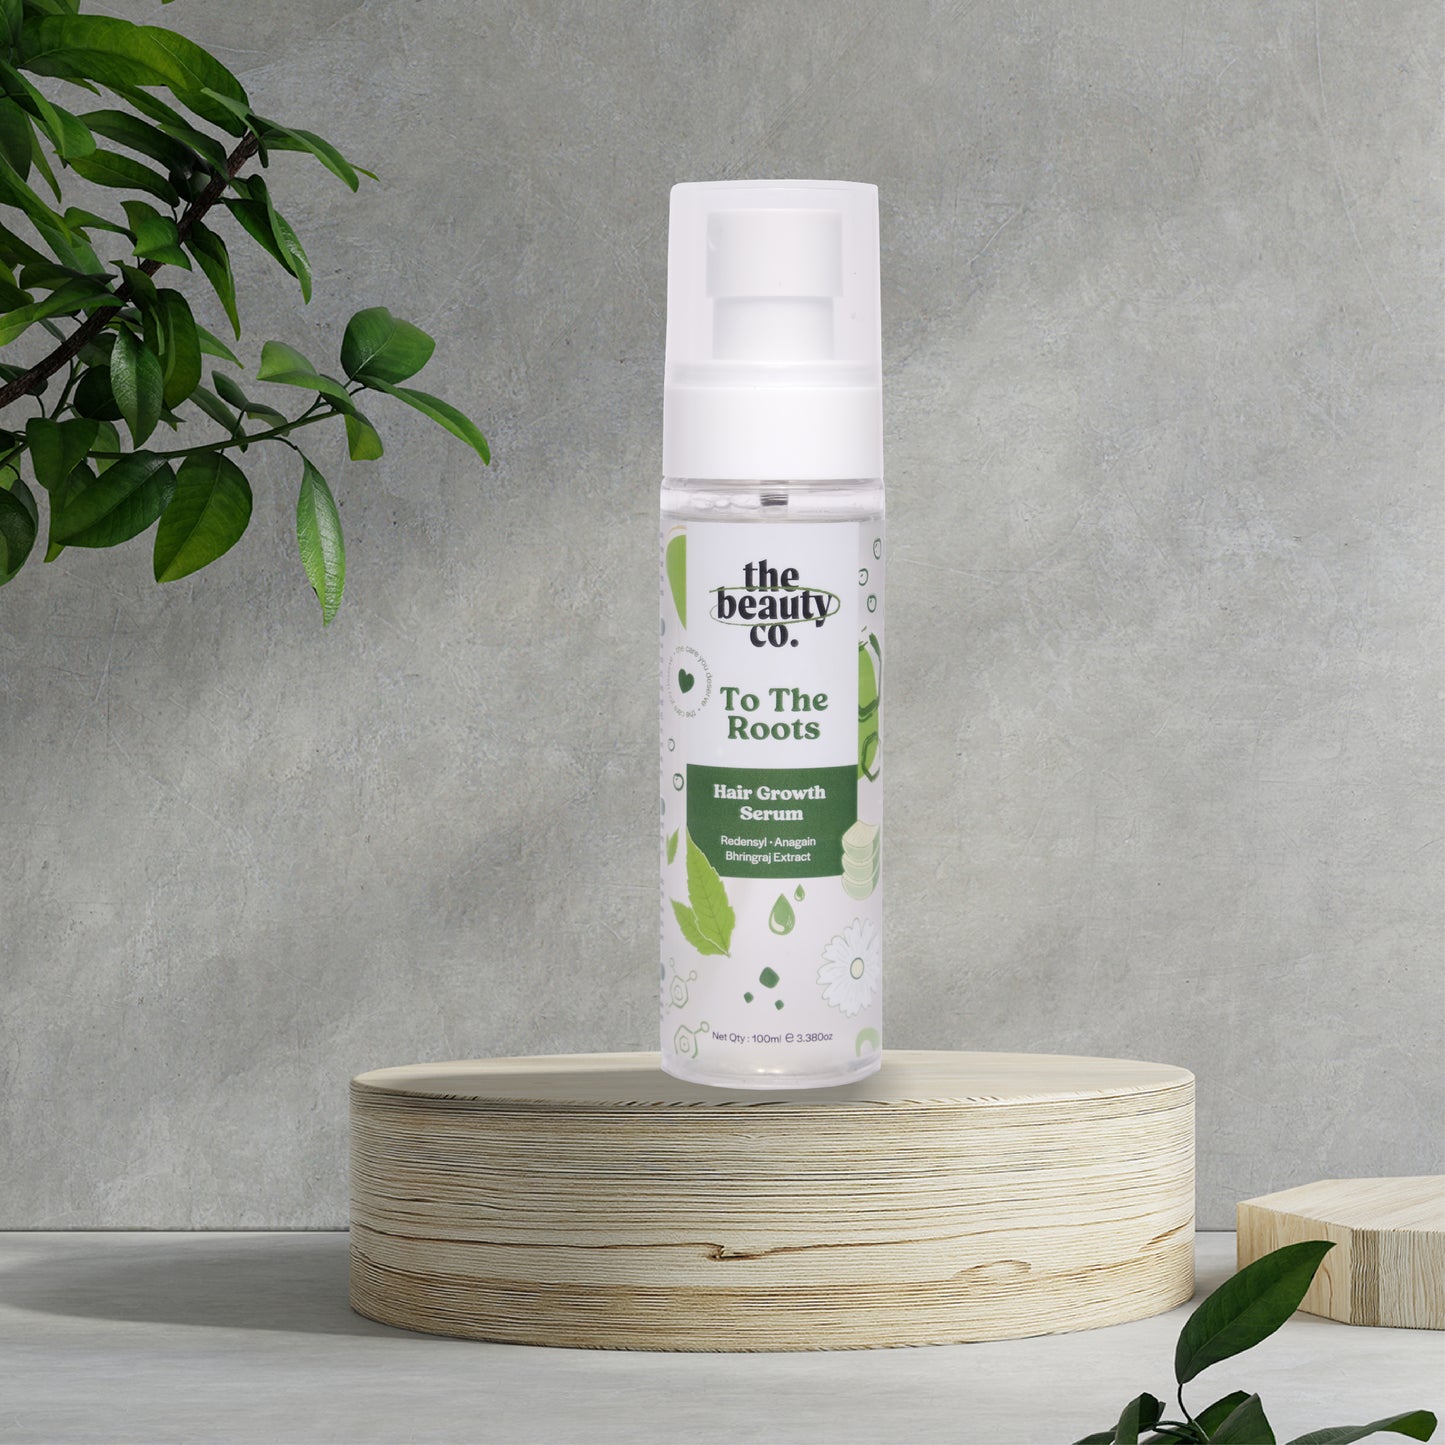 To The Roots Hair Growth Serum With Redensyl & Anagain